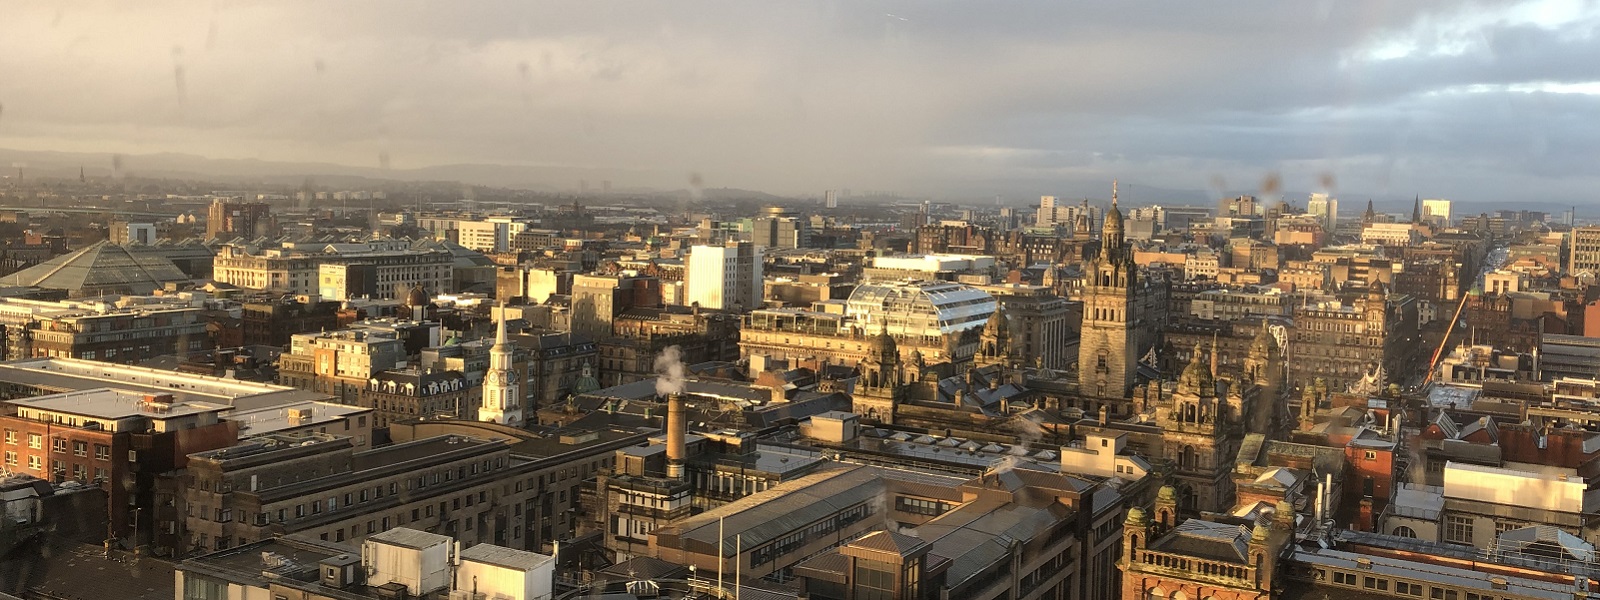 View of Glasgow from the top of Livingstone Tower